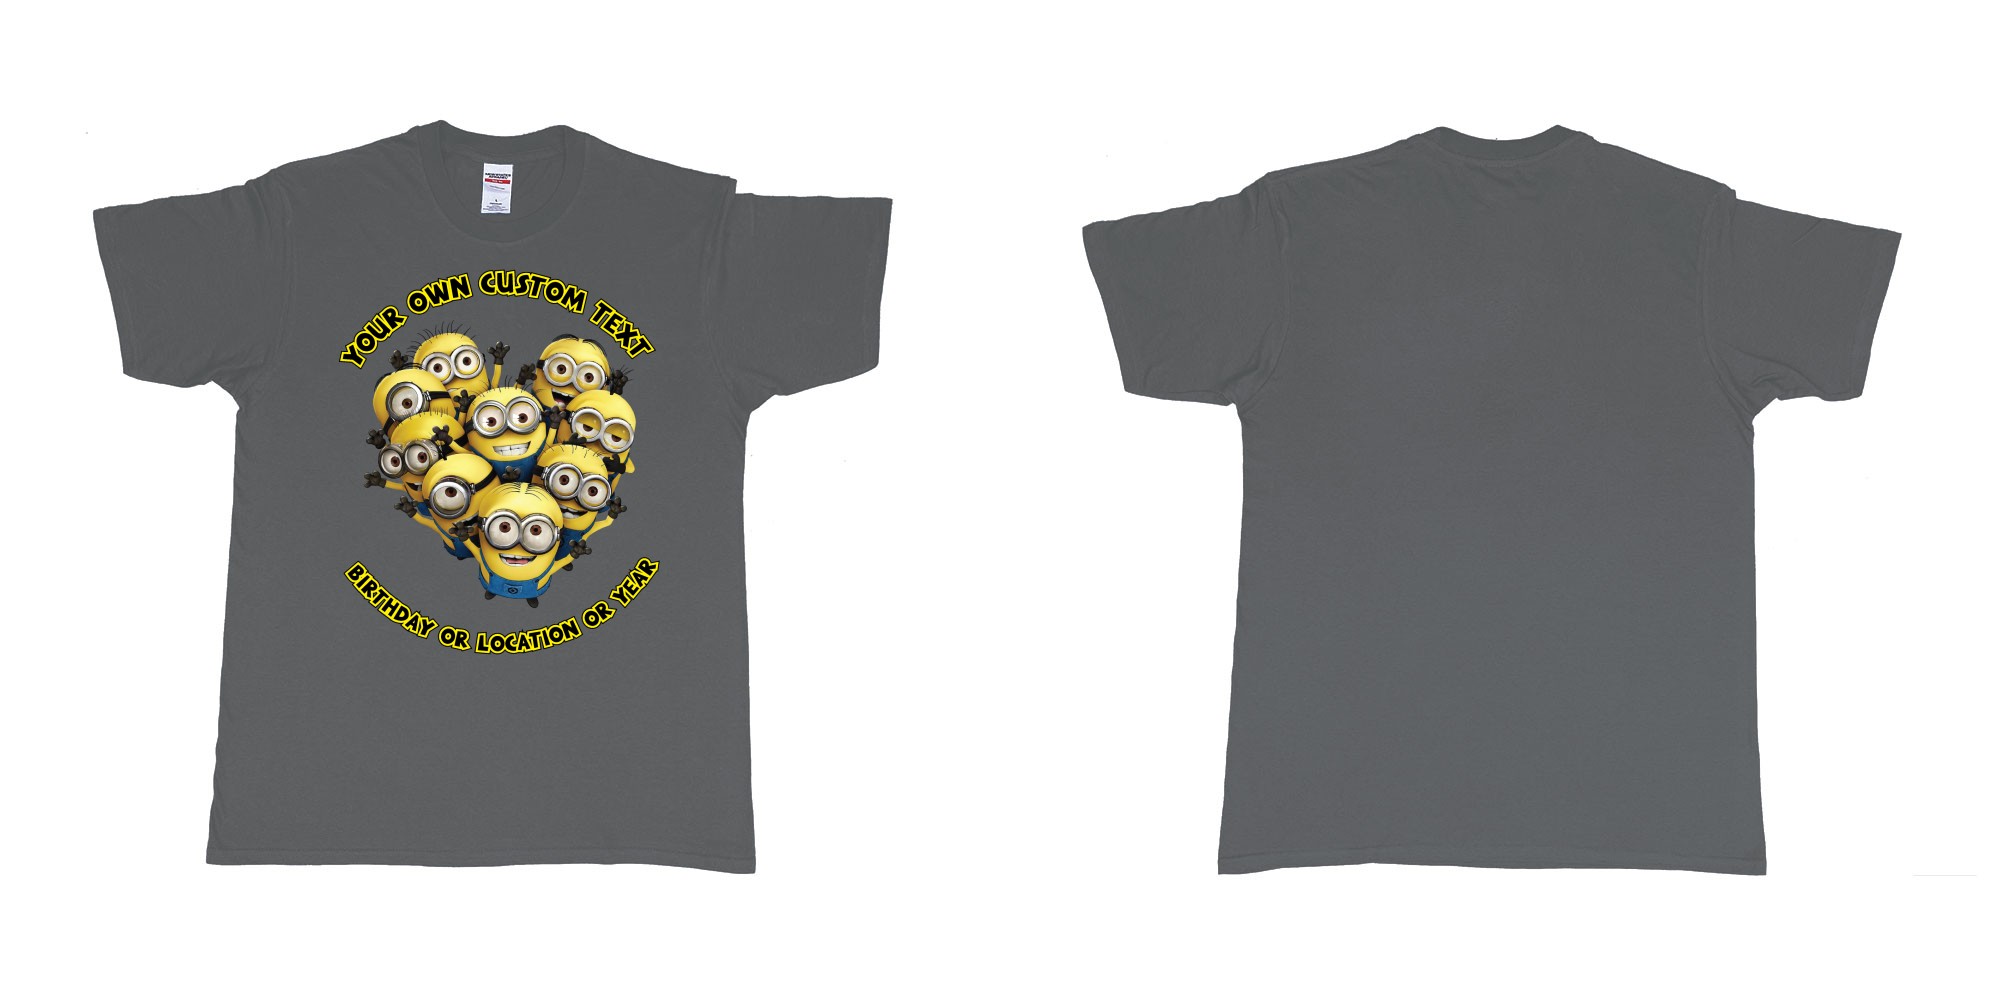 Custom tshirt design minions celebrating you in fabric color charcoal choice your own text made in Bali by The Pirate Way